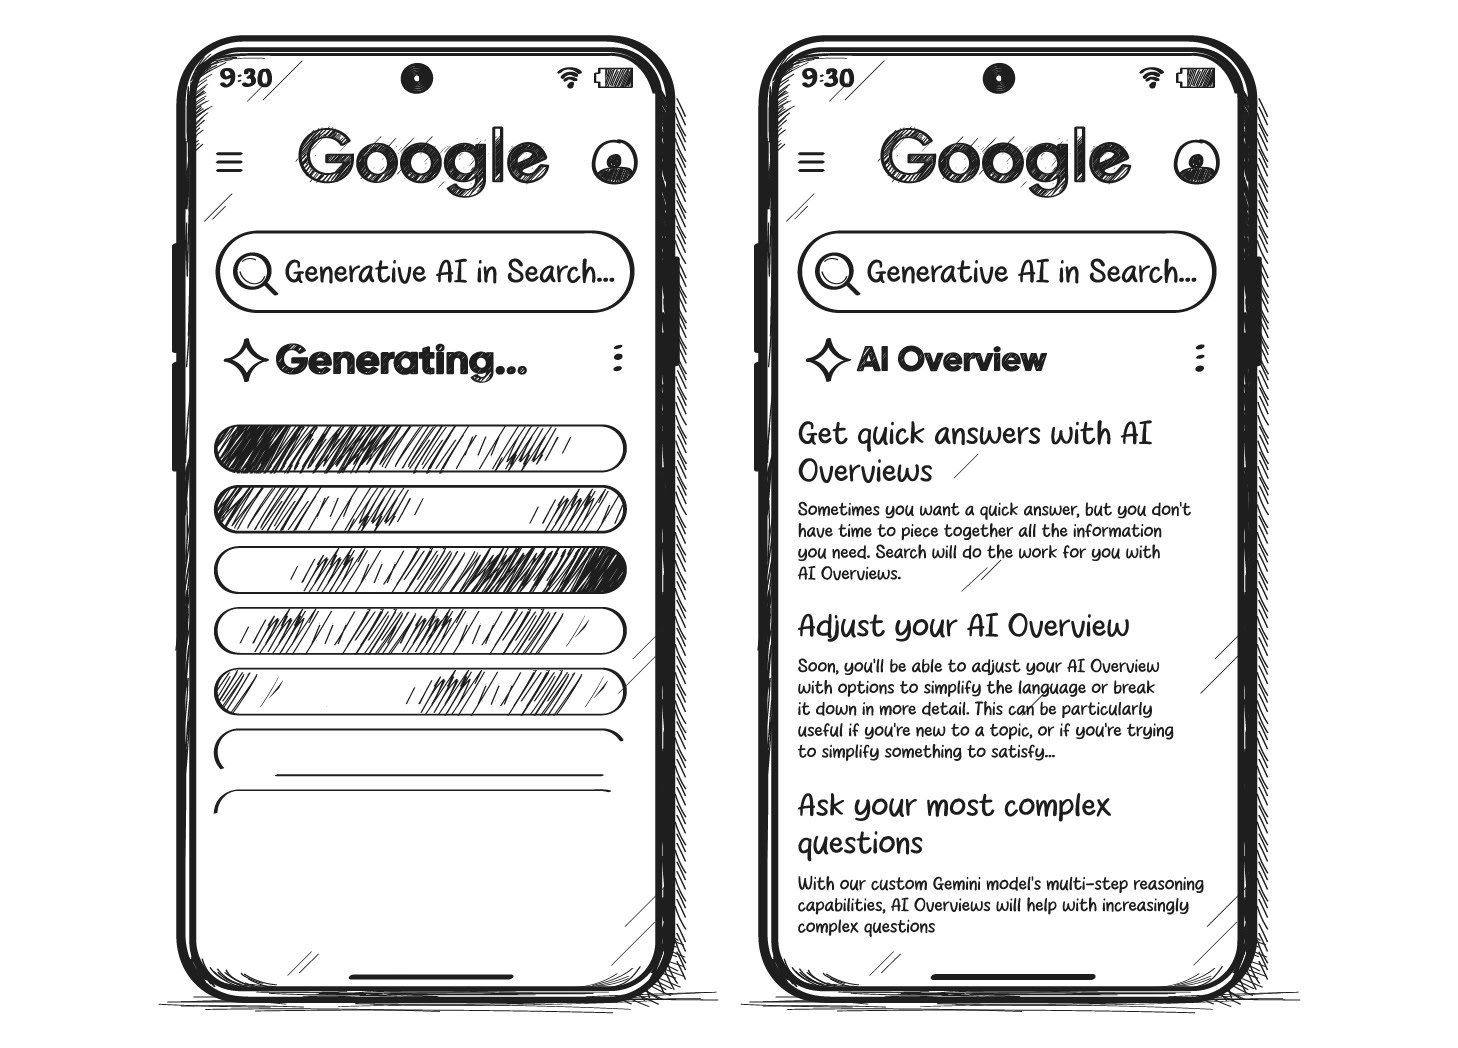 Two smartphone screens displaying Google search features.